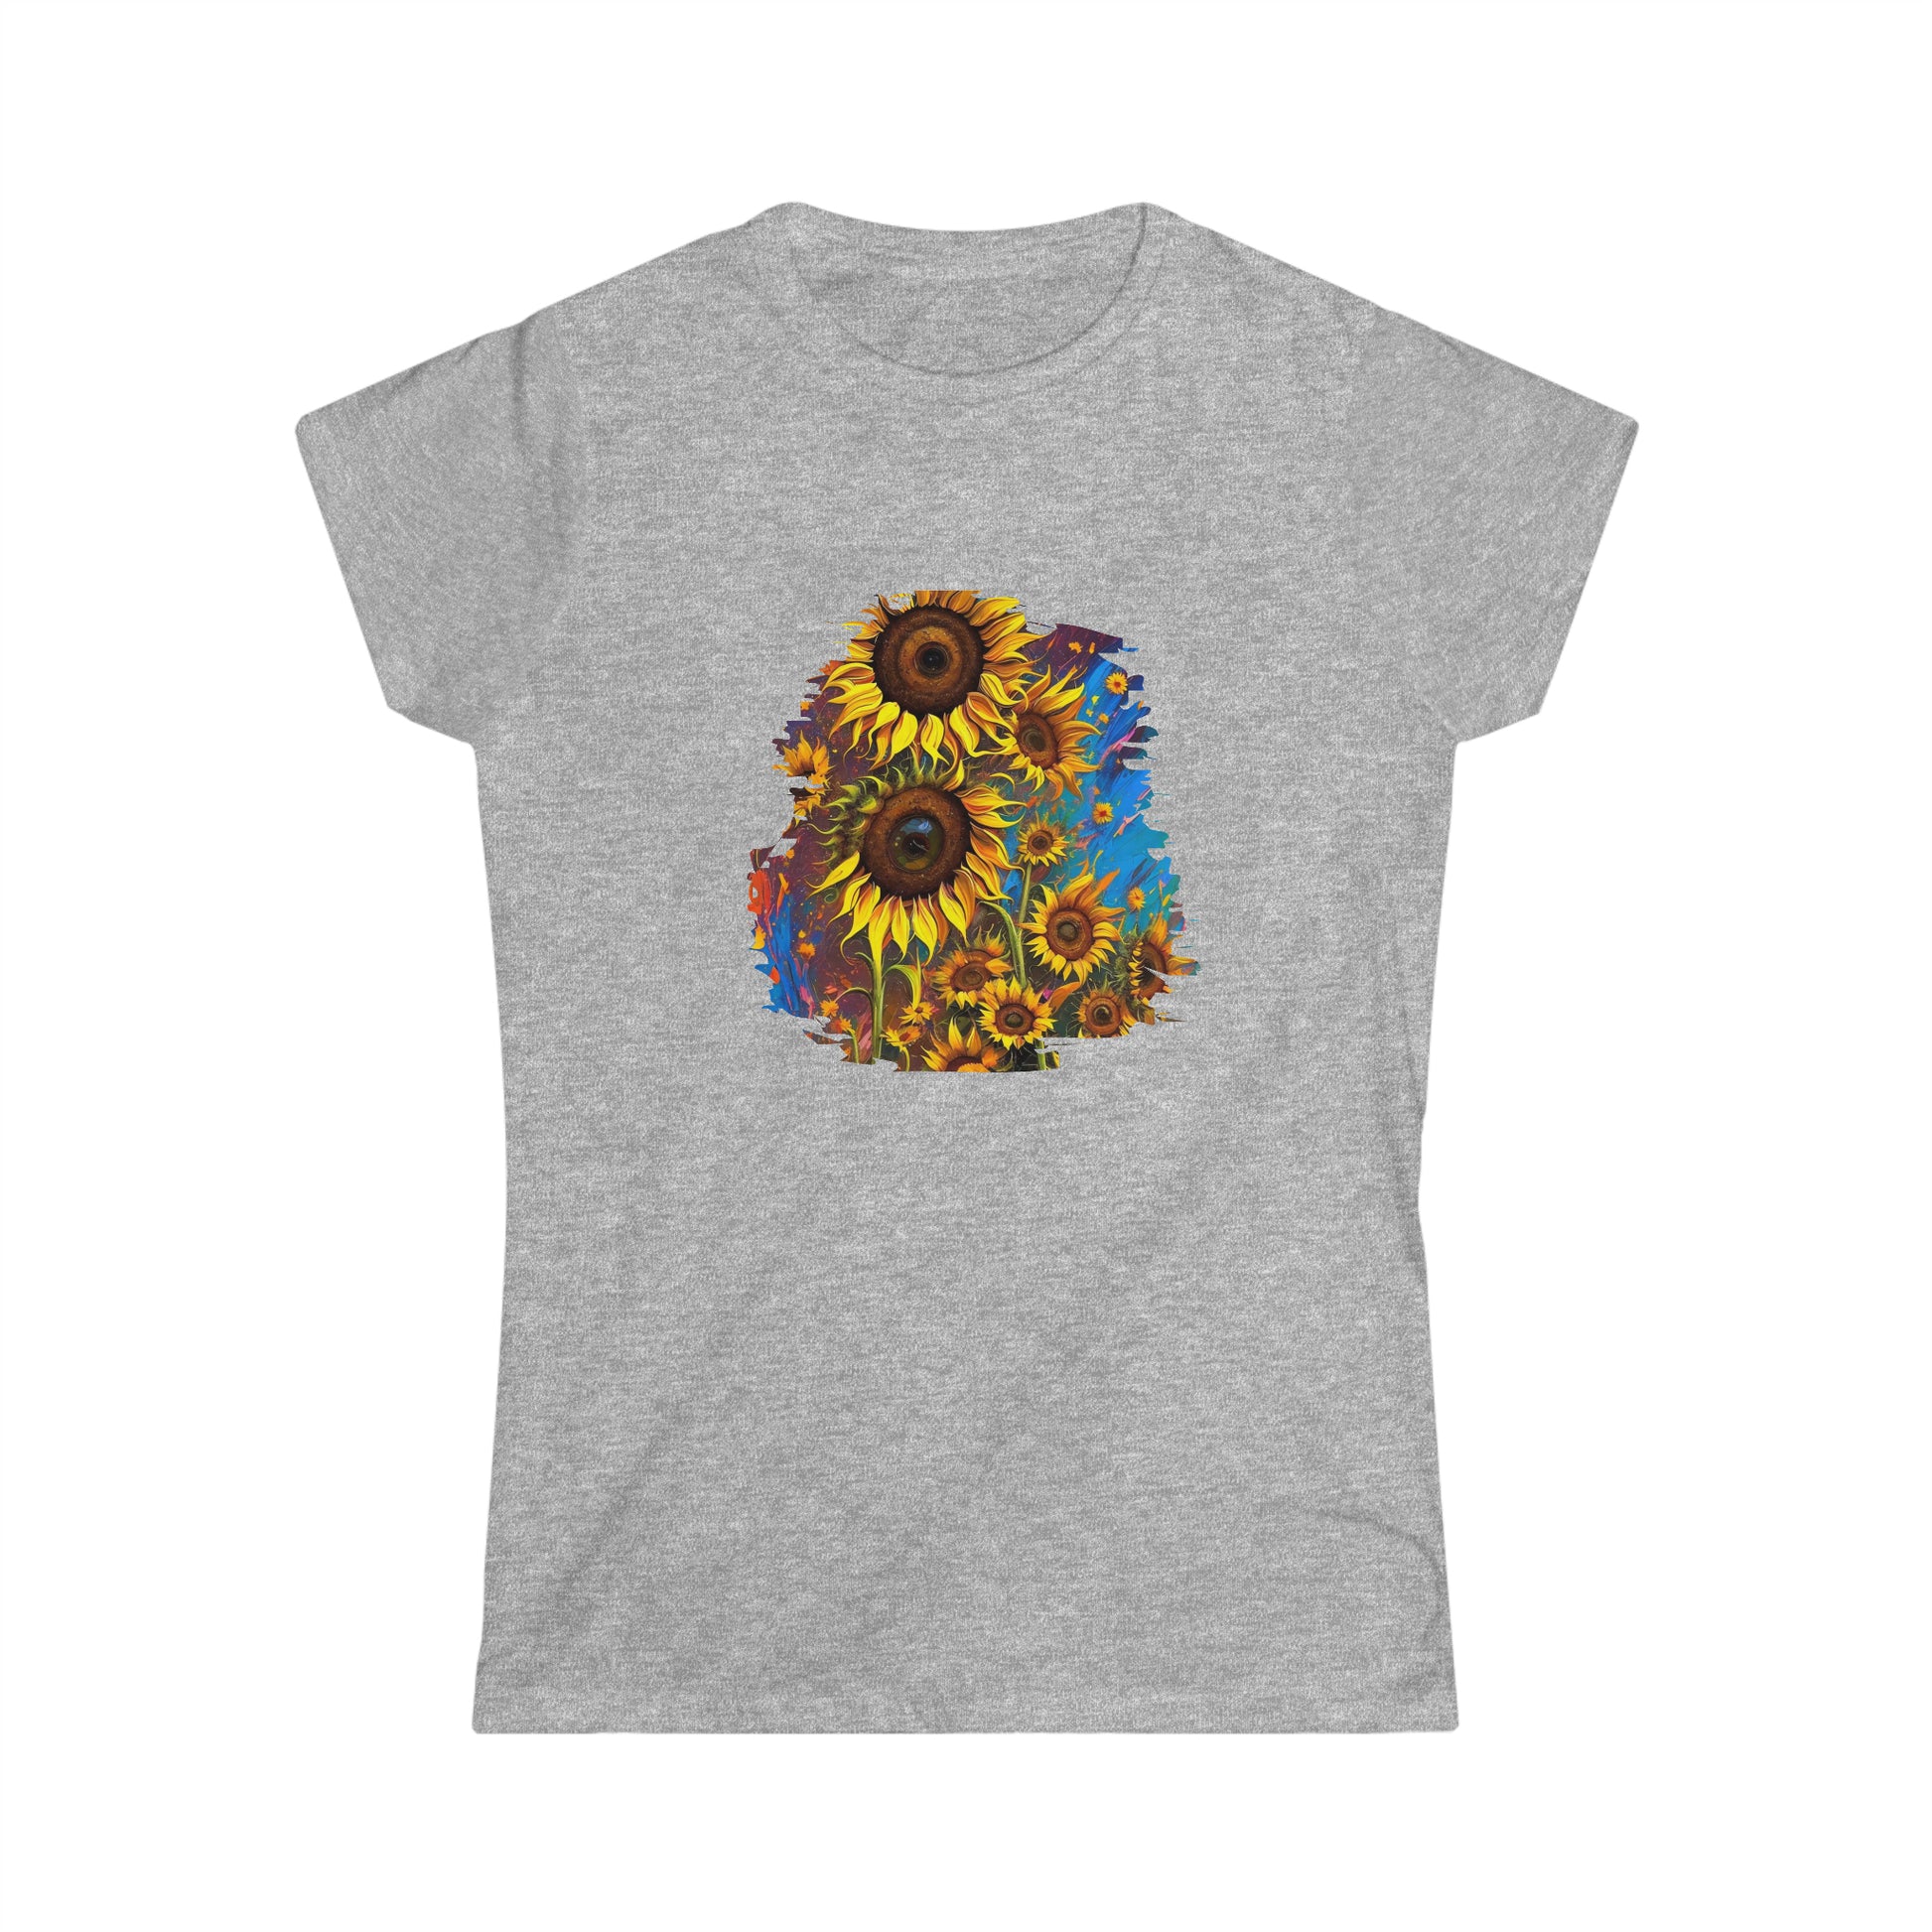 Women's Softstyle Tee - SUNFLOWERS - 12 SECONDS APPAREL